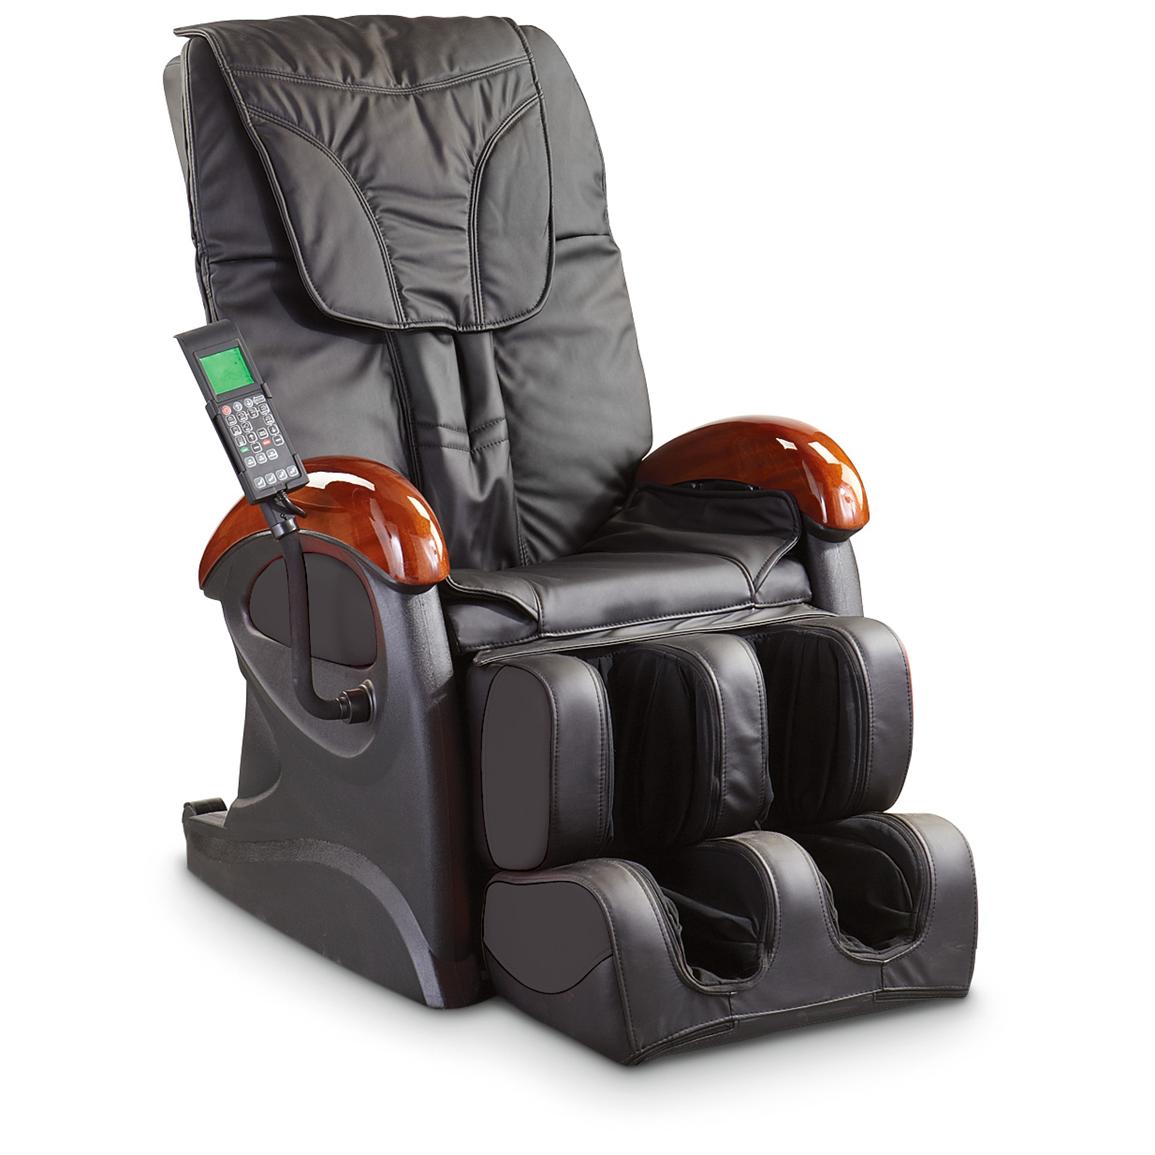 Deluxe Shiatsu Massage Chair Black 299928 Massage Chairs And Tables